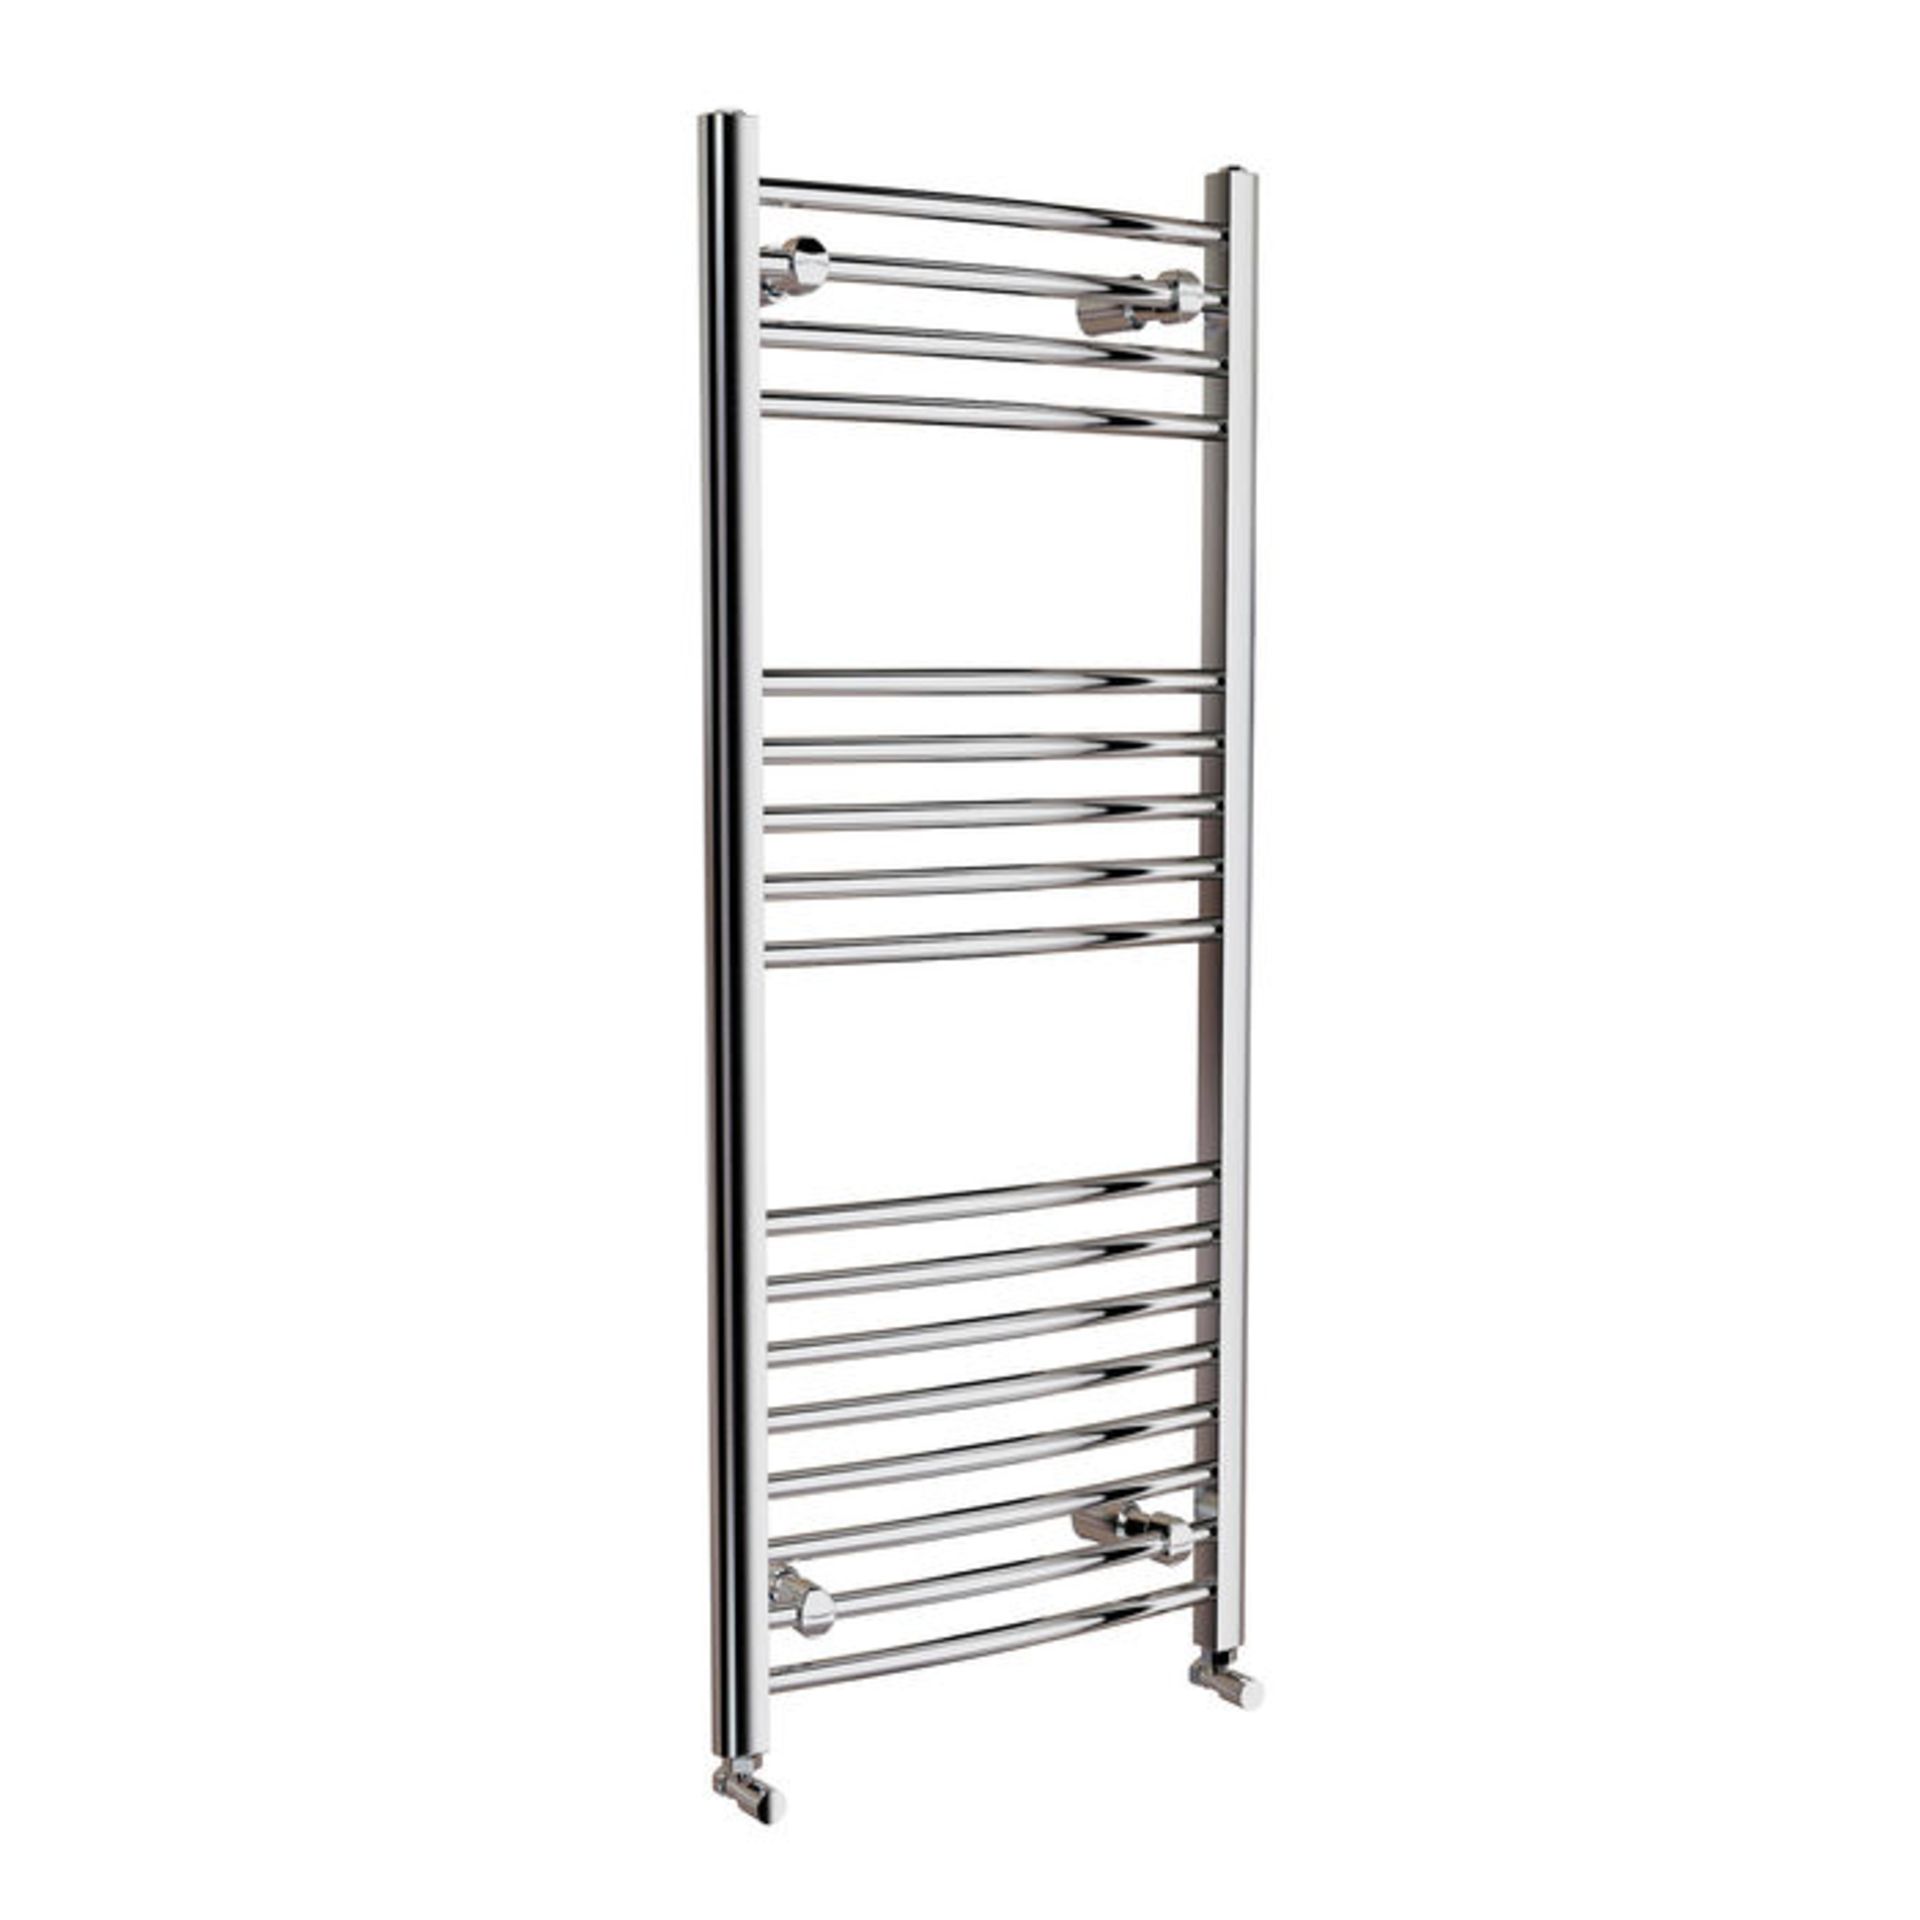 (EY121) 1200x500mm - 20mm Tubes - Chrome Curved Rail Ladder Towel Radiator. Made from chrome - Image 3 of 3